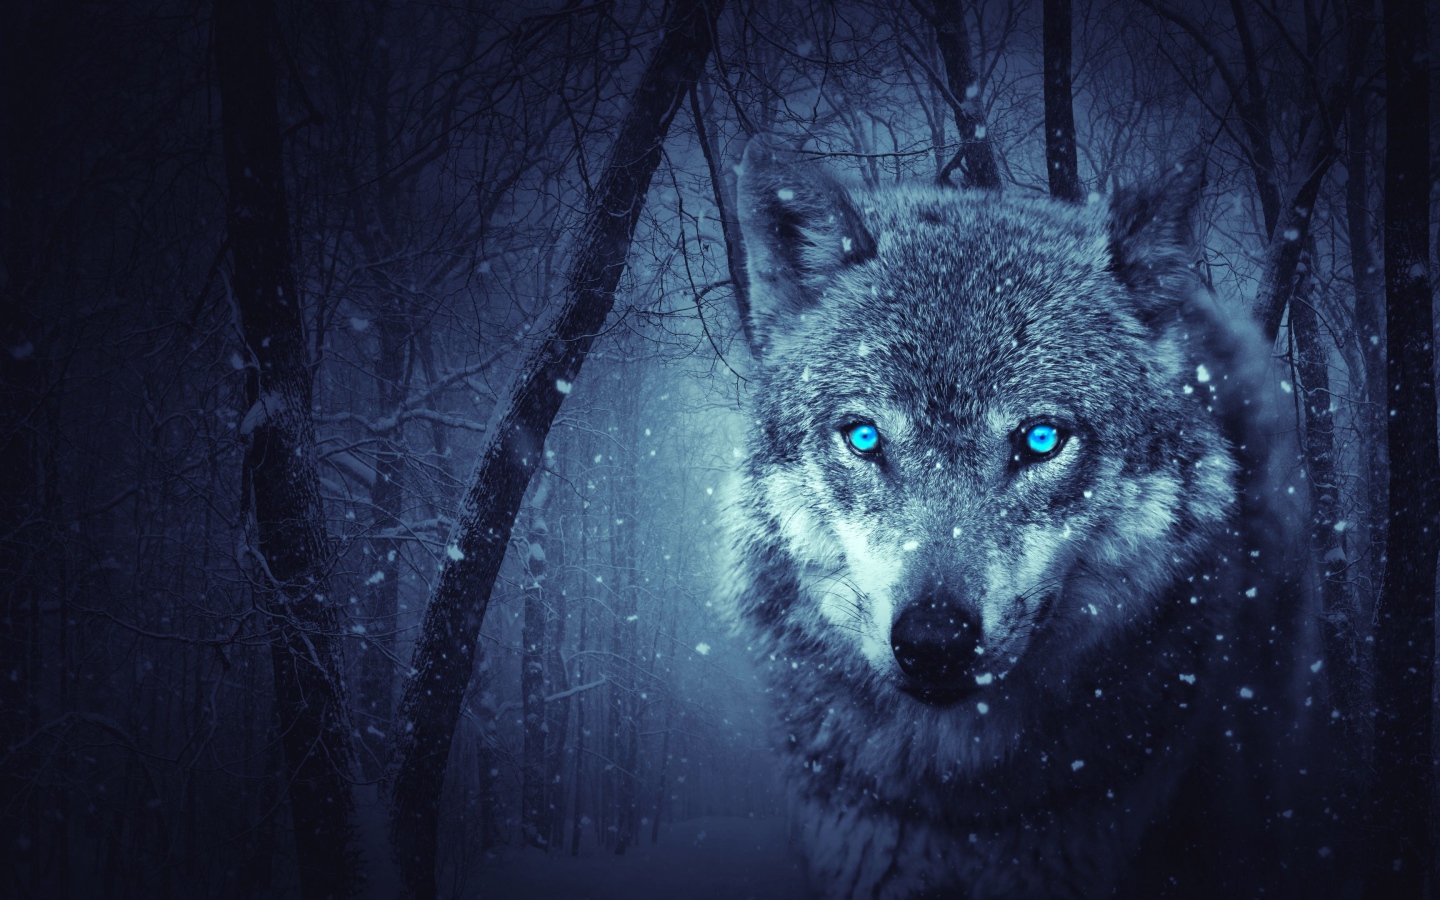 Gray wolf with blue eyes in a cold winter forest